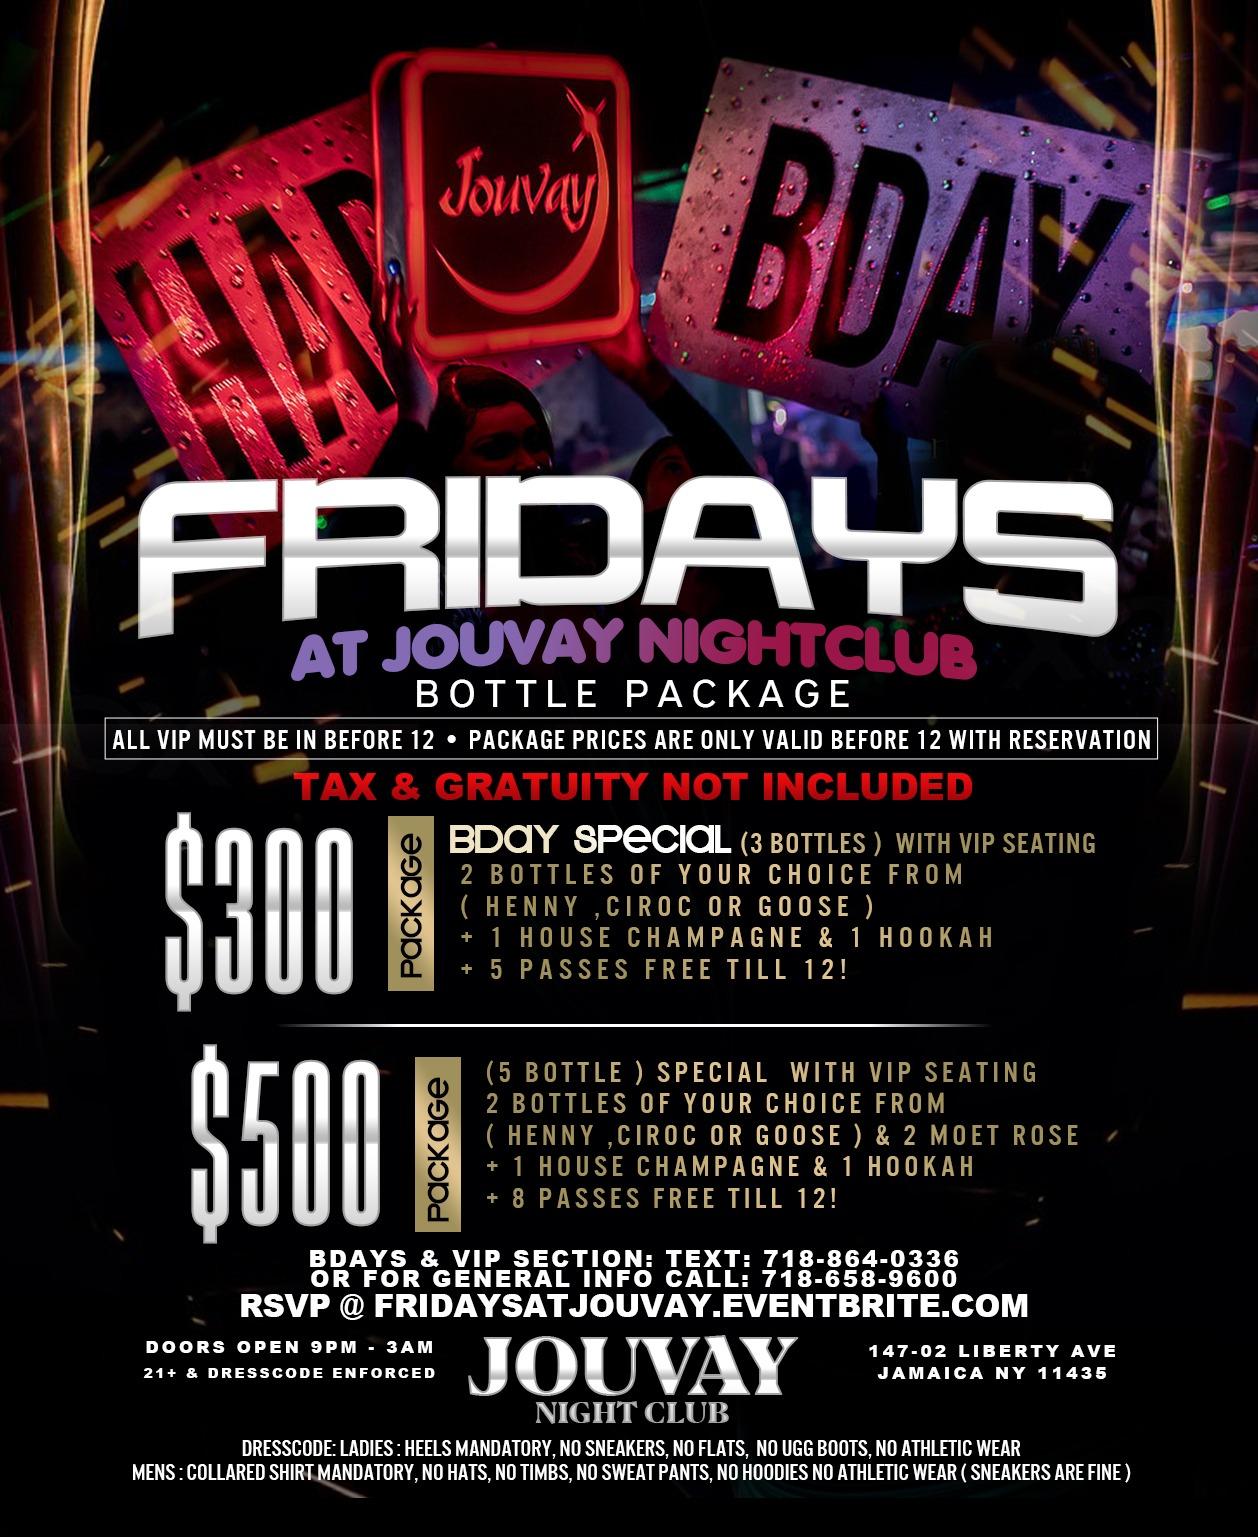 FUSION FRIDAYS AT JOUVAY HOSTED BY TEAMINNO